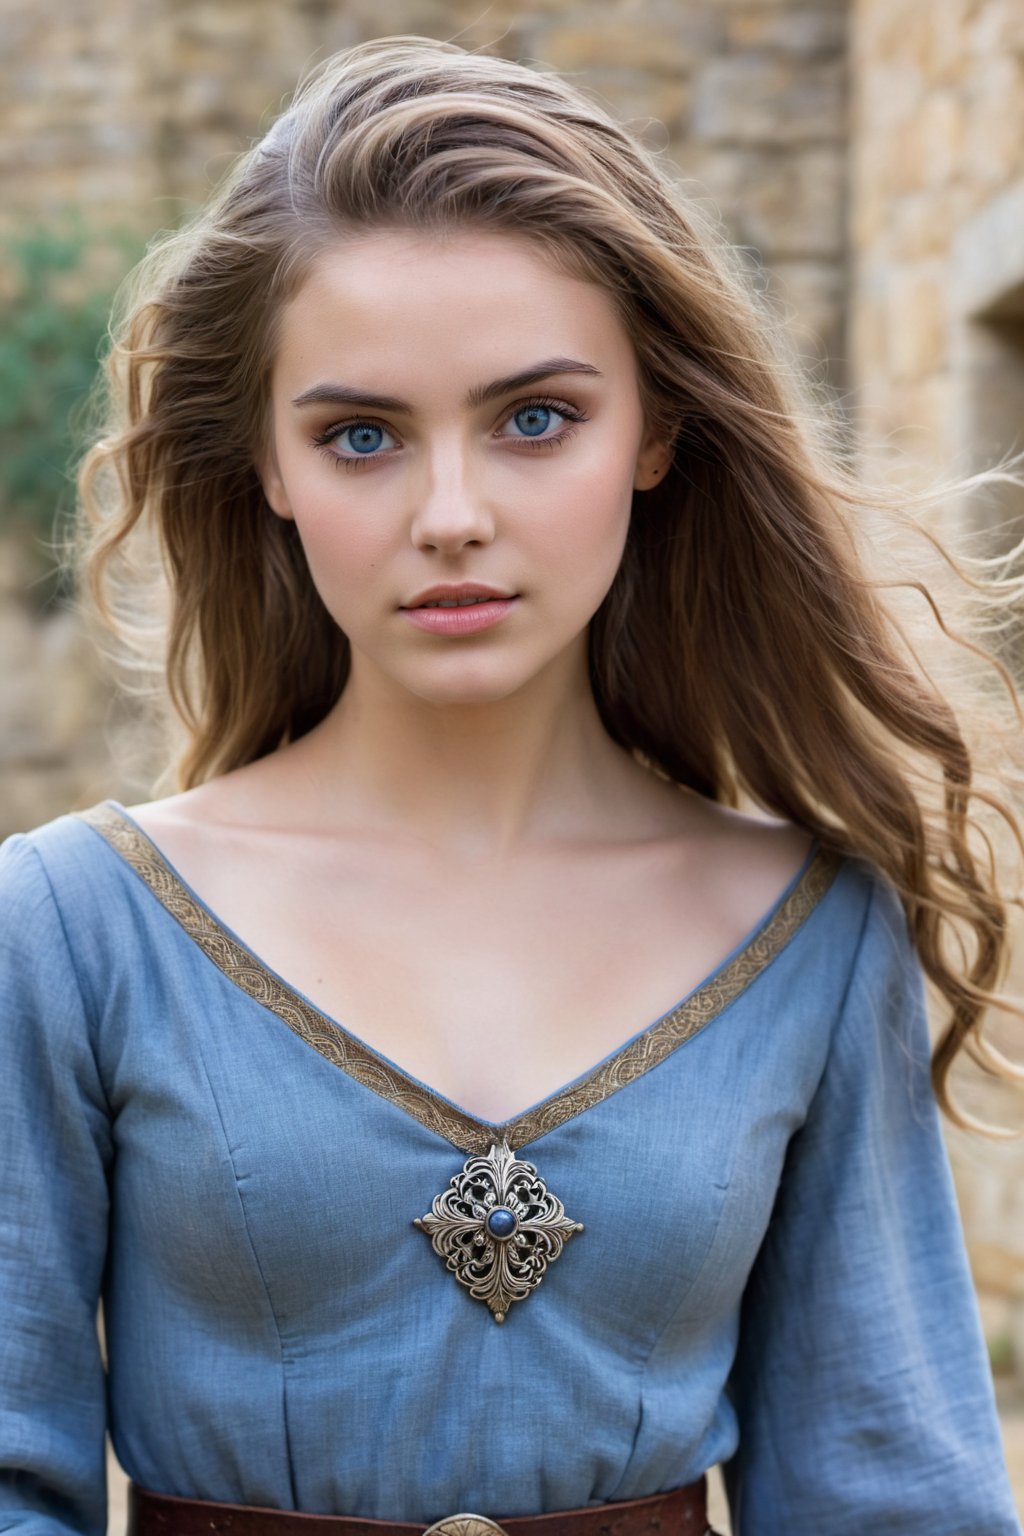 A serene young beauty, 18 years old, stands before us, her slender yet curvaceous figure showcased in a medieval setting. Her striking blue eyes, framed by delicate eyelashes, meet the camera's gaze directly. Thin, downward-turned lips hint at a subtle sensuality. A model-like face, with high cheekbones and defined jawline, is accentuated by the soft, brown tangles of her hair, which fall messily across her forehead. The worn, earthy tones of her medieval attire - a faded cloak and tunic - blend seamlessly with the rustic village backdrop. The subject's collarbone stands out prominently, as if defining the lines of her elegant neck. Her gaze is direct, inviting the viewer to step into her world.